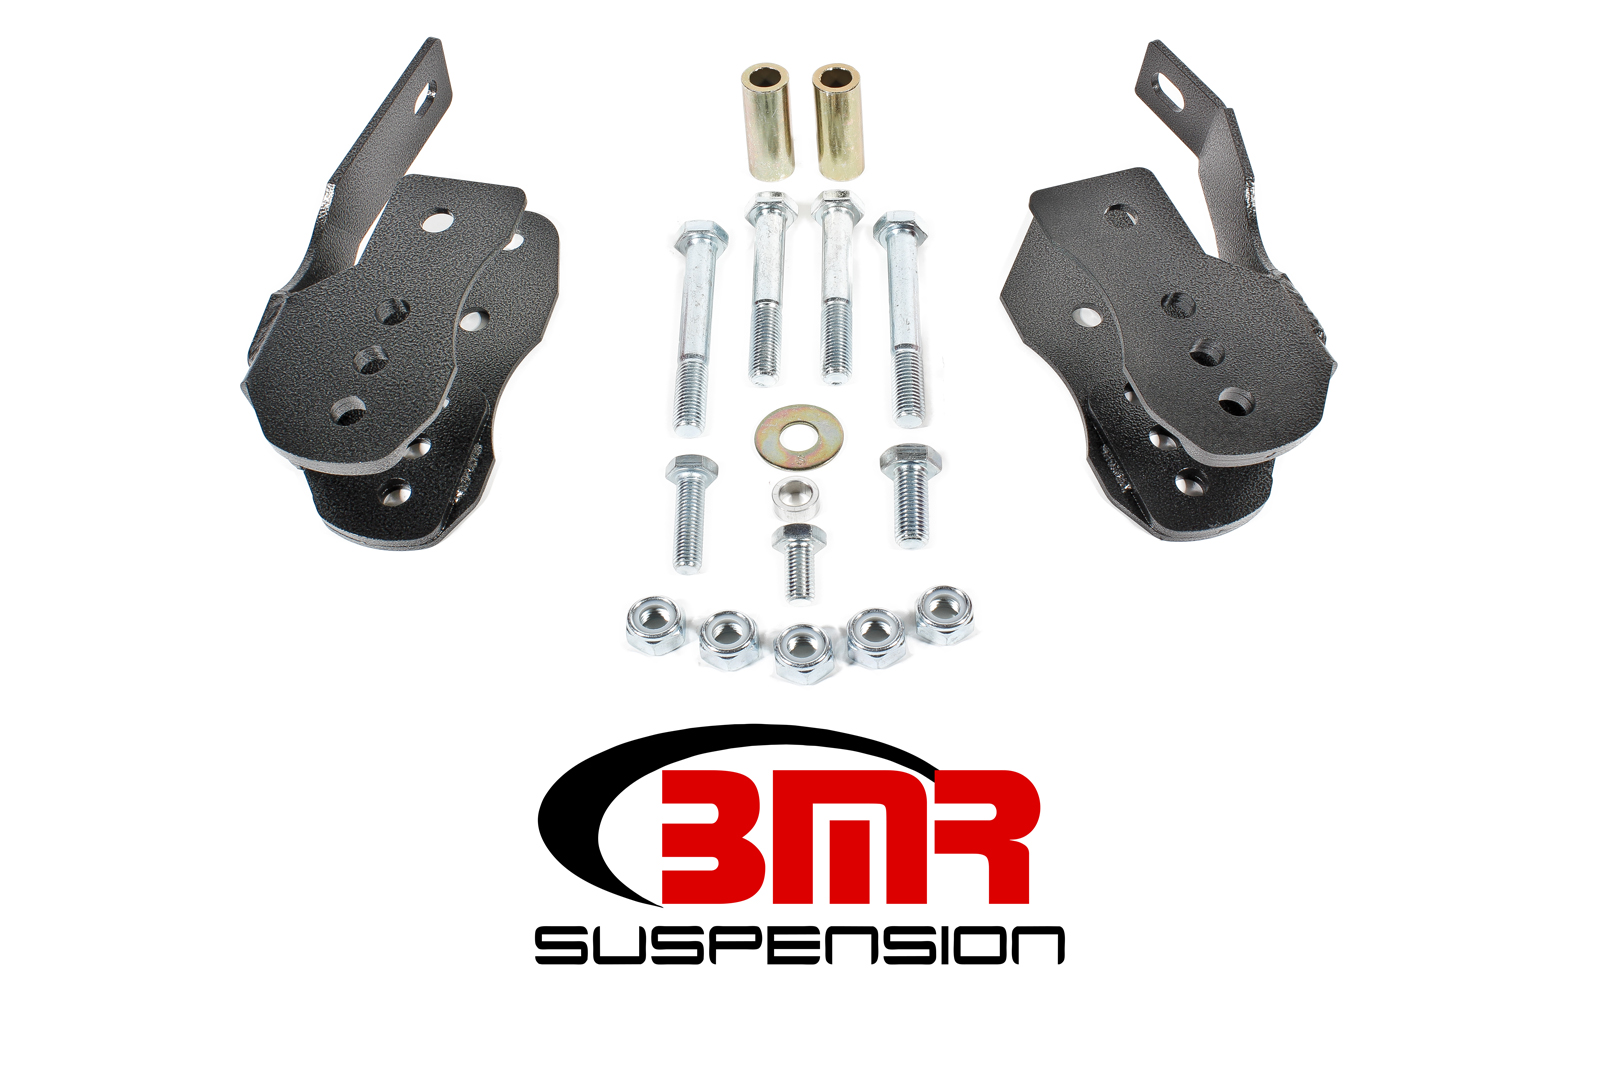 Control Arm Relocation Brackets, Bolt-on, Fits 2005-2014 S197 Mustang, BMR Suspension - CAB005H